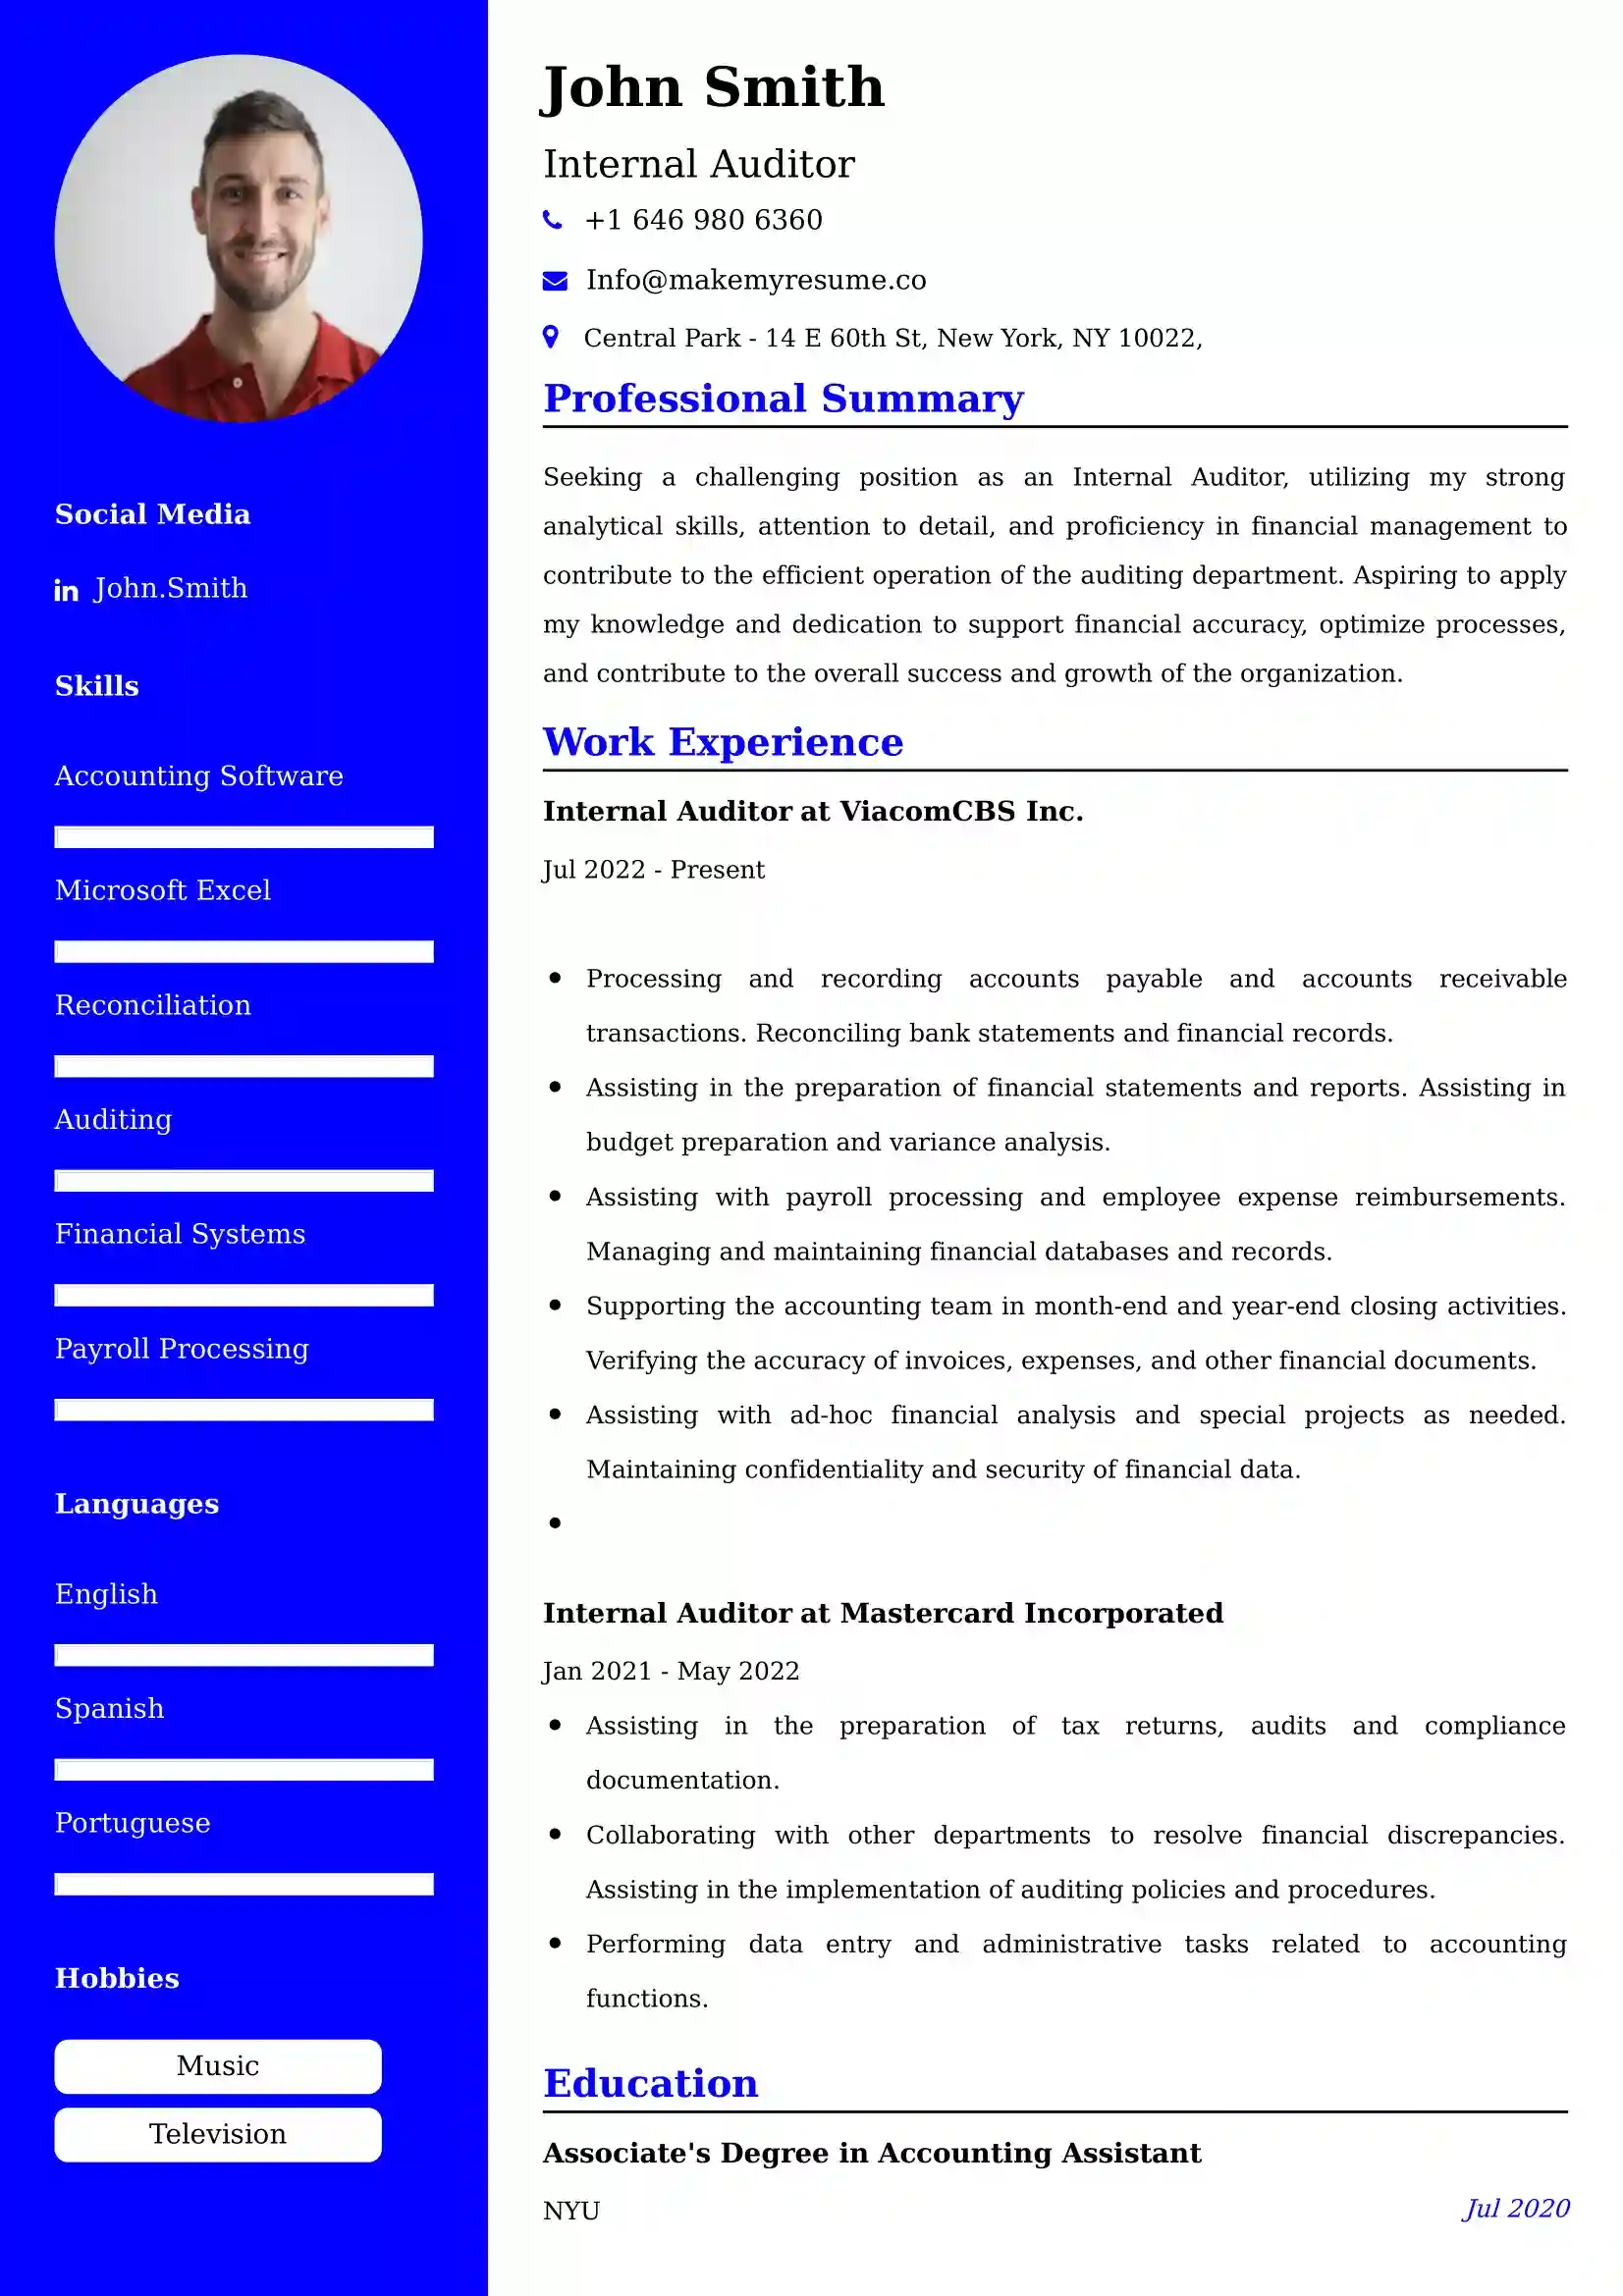 Internal Auditor Resume Examples - UK Format, Latest Template.